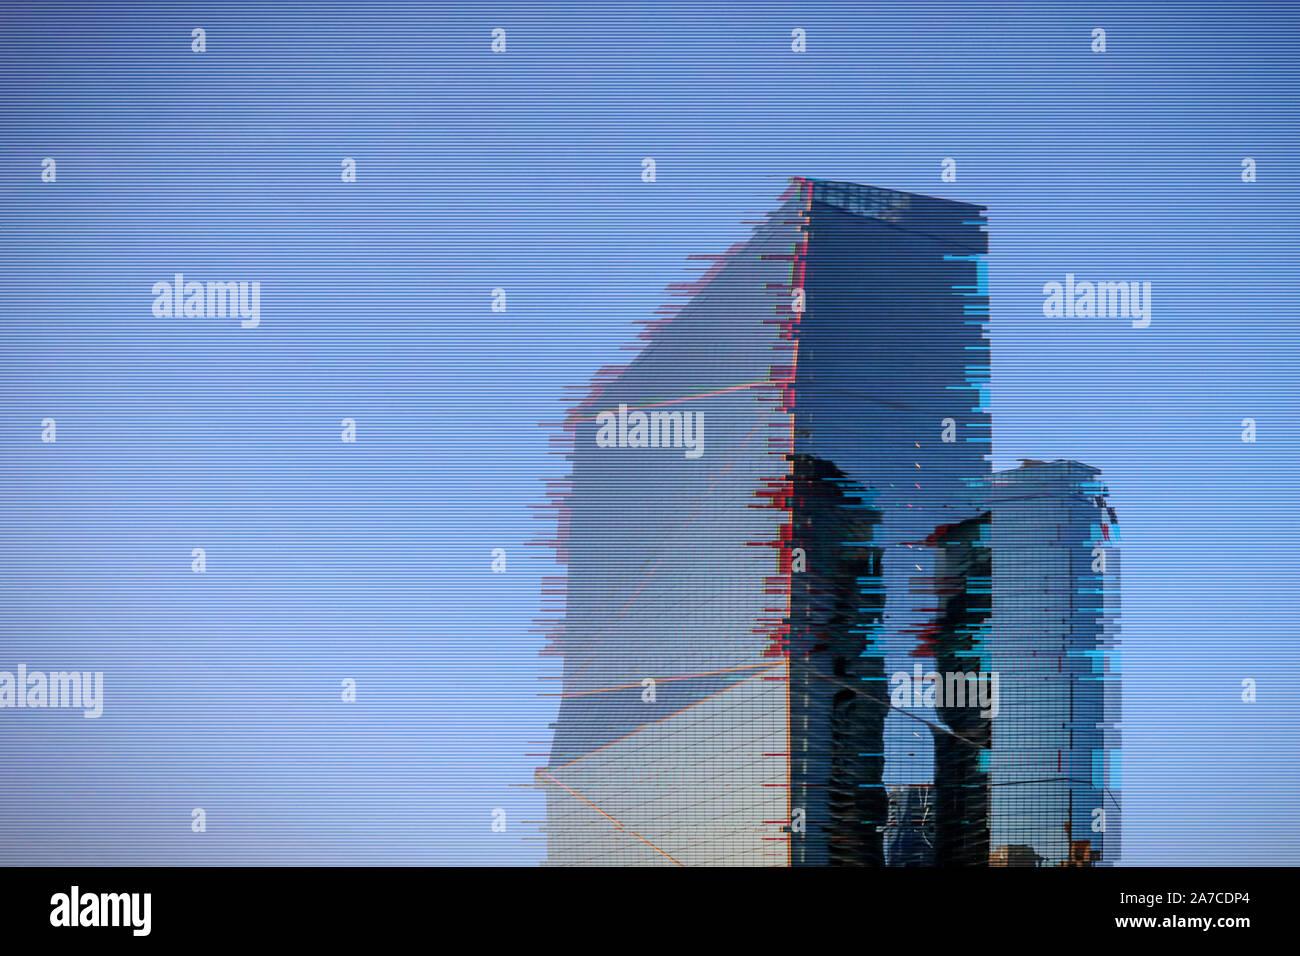 Office glitch building on blue background. Abstract digital background. Glitch city noise texture. Technology background digital glitch effect. Stock Photo